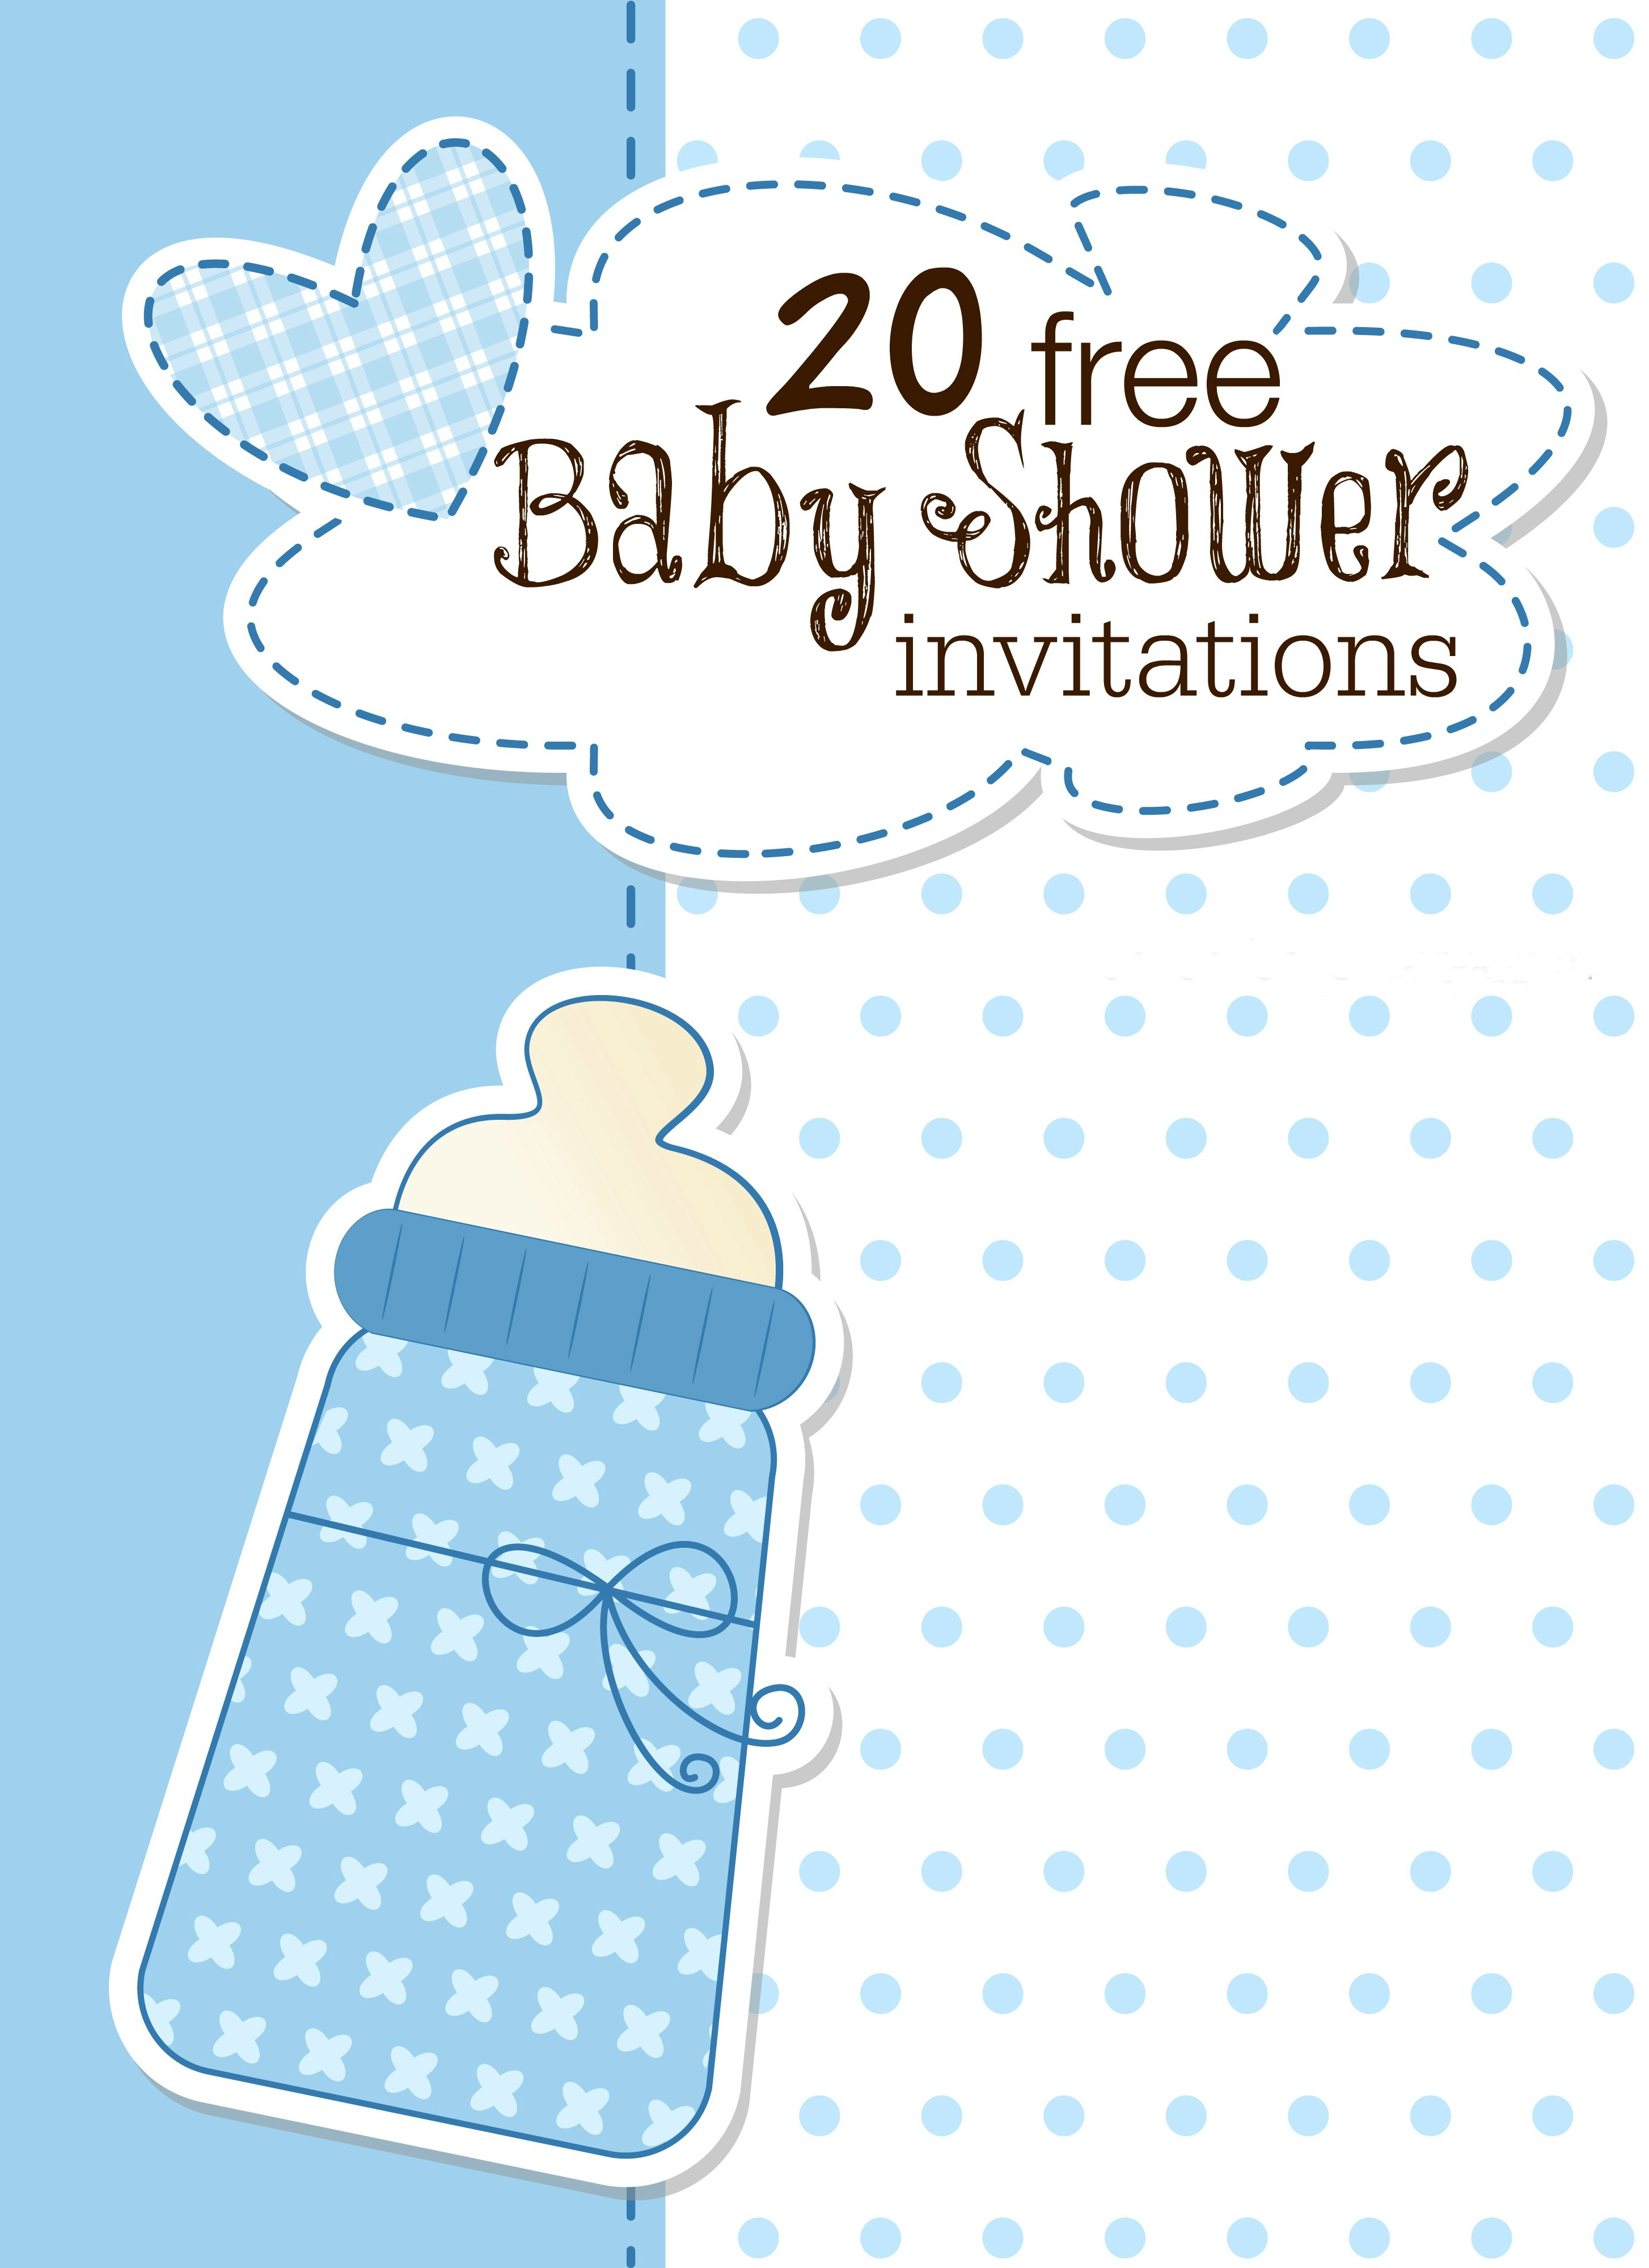 Printable Baby Shower Invitations - Create Your Own Baby Shower Invitations Free Printable